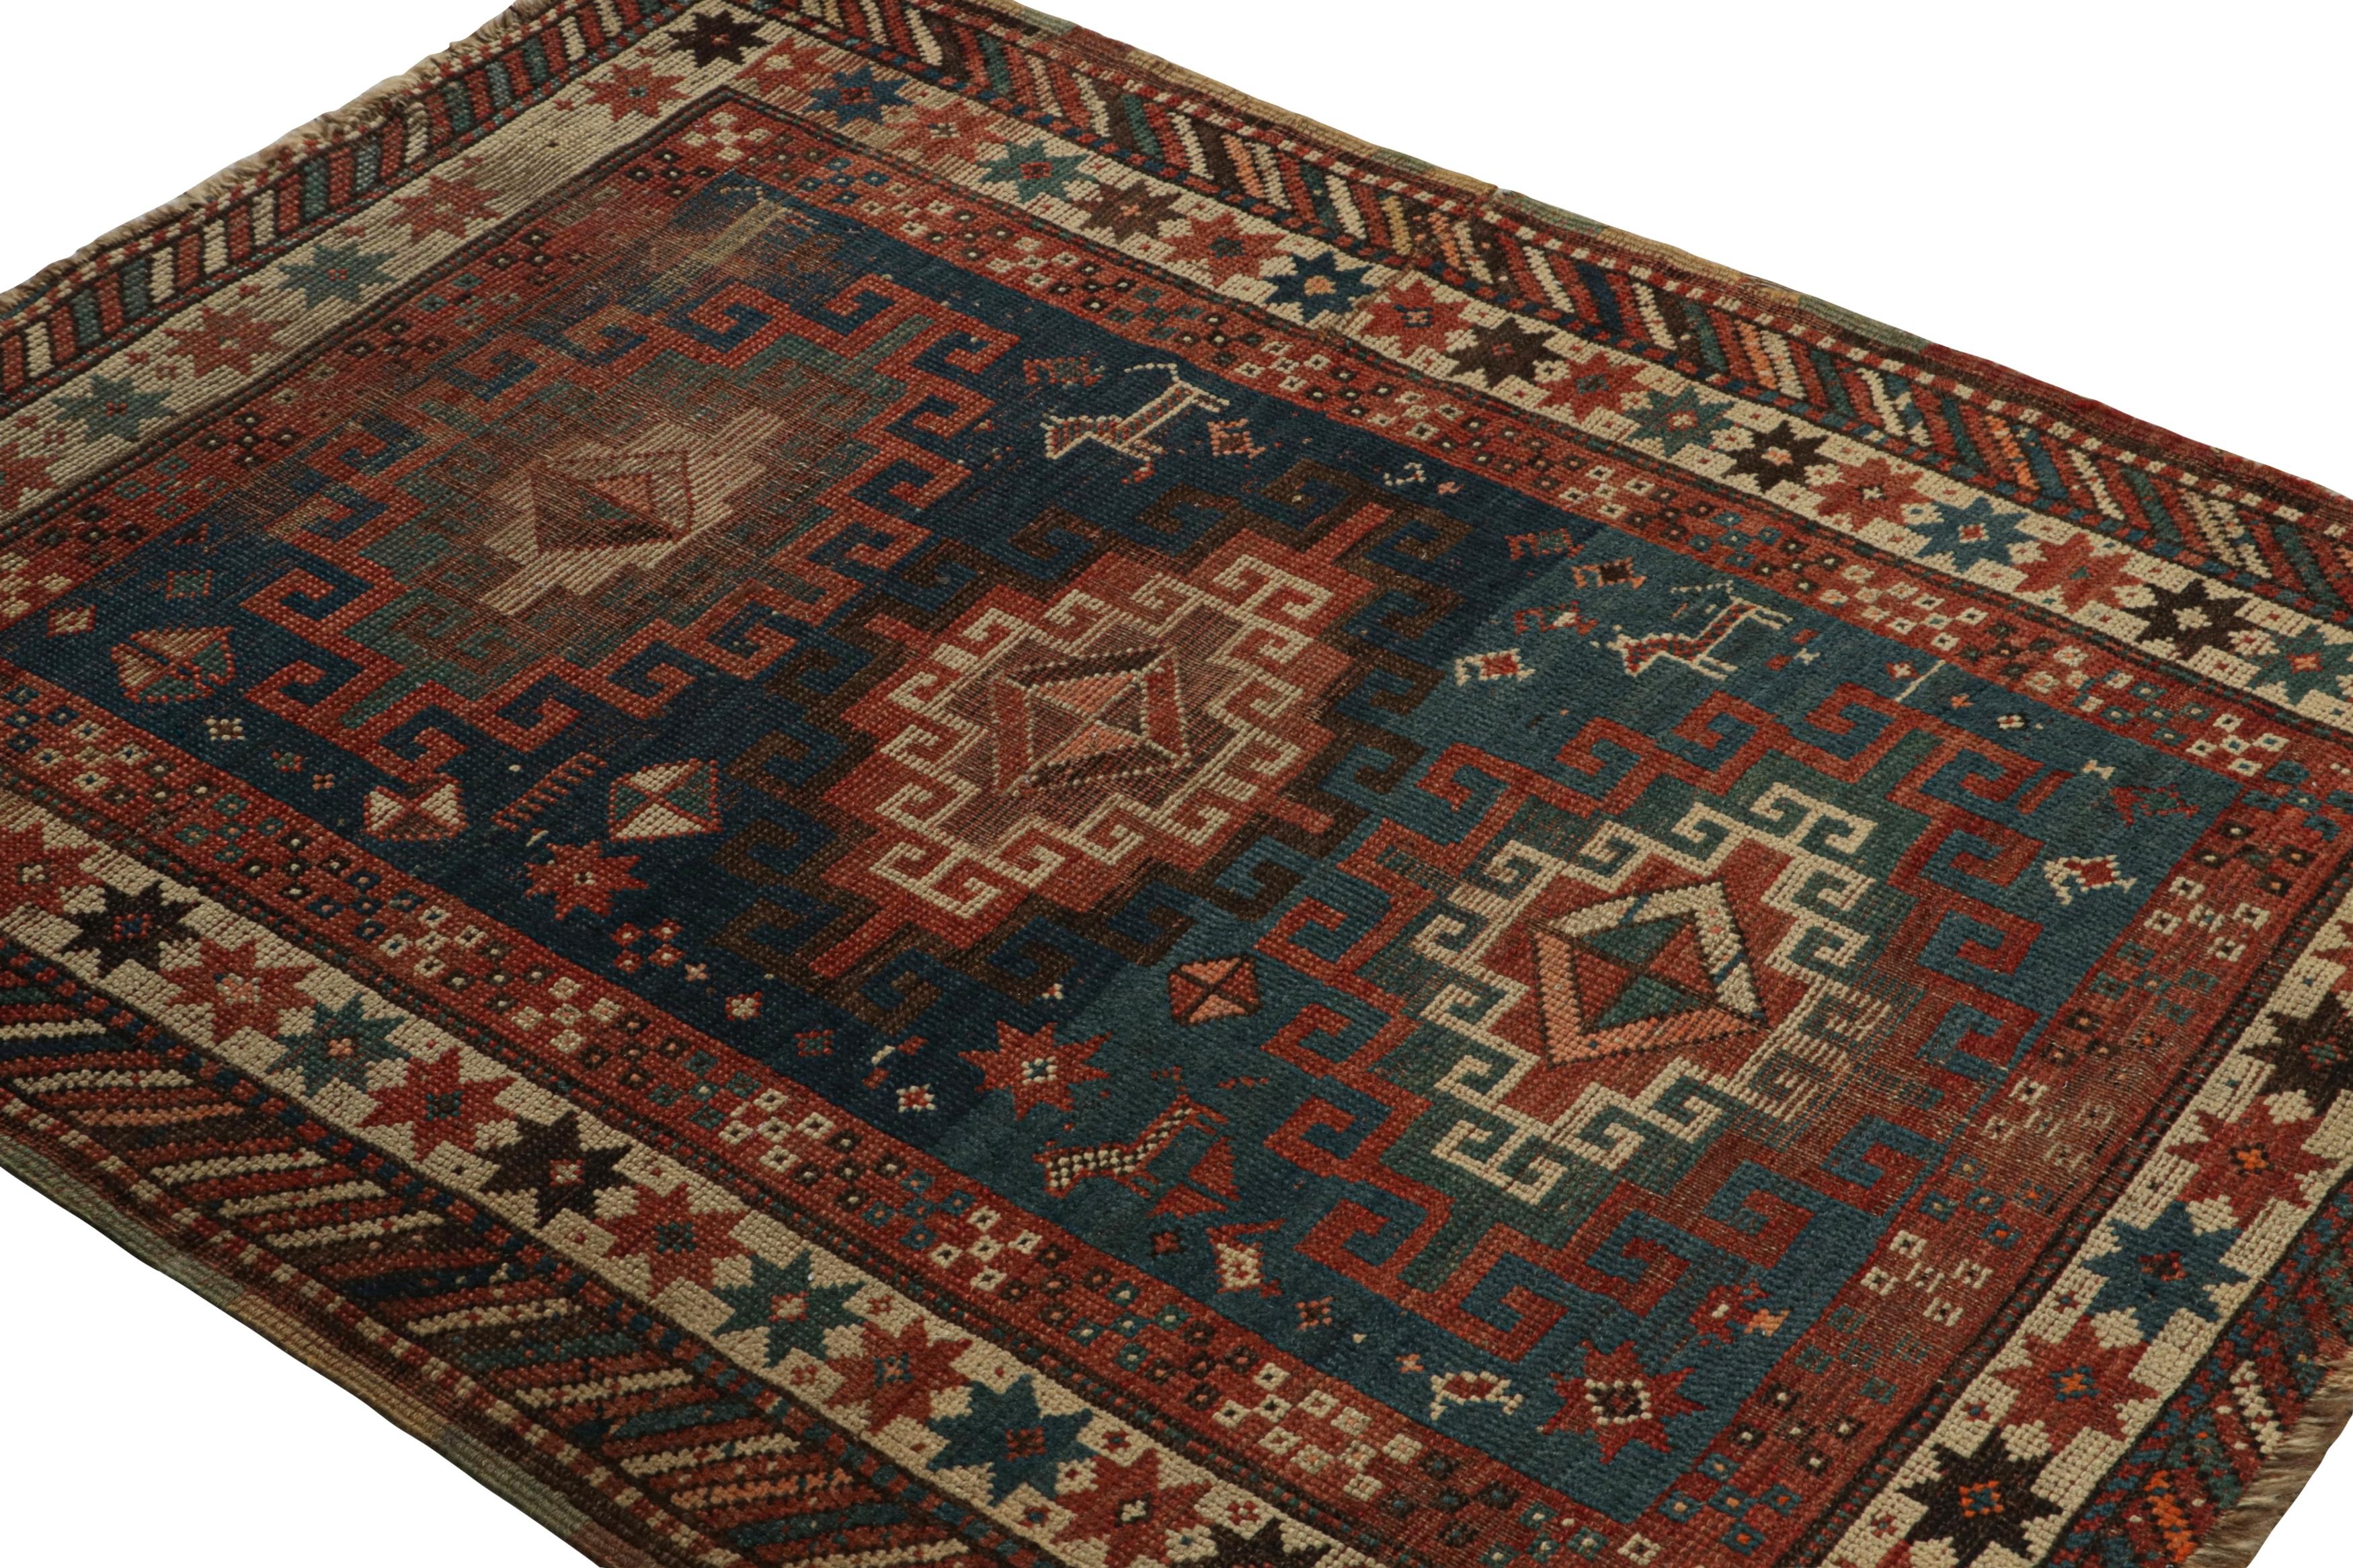 Hand-knotted in wool, this 3x5 Antique Caucasian tribal rug, originating from Russia, features large Guls and nomadic oriental-like geometric patterns. With rare animal pictorial figures in symbols, its design is a work of folk art with rustic,